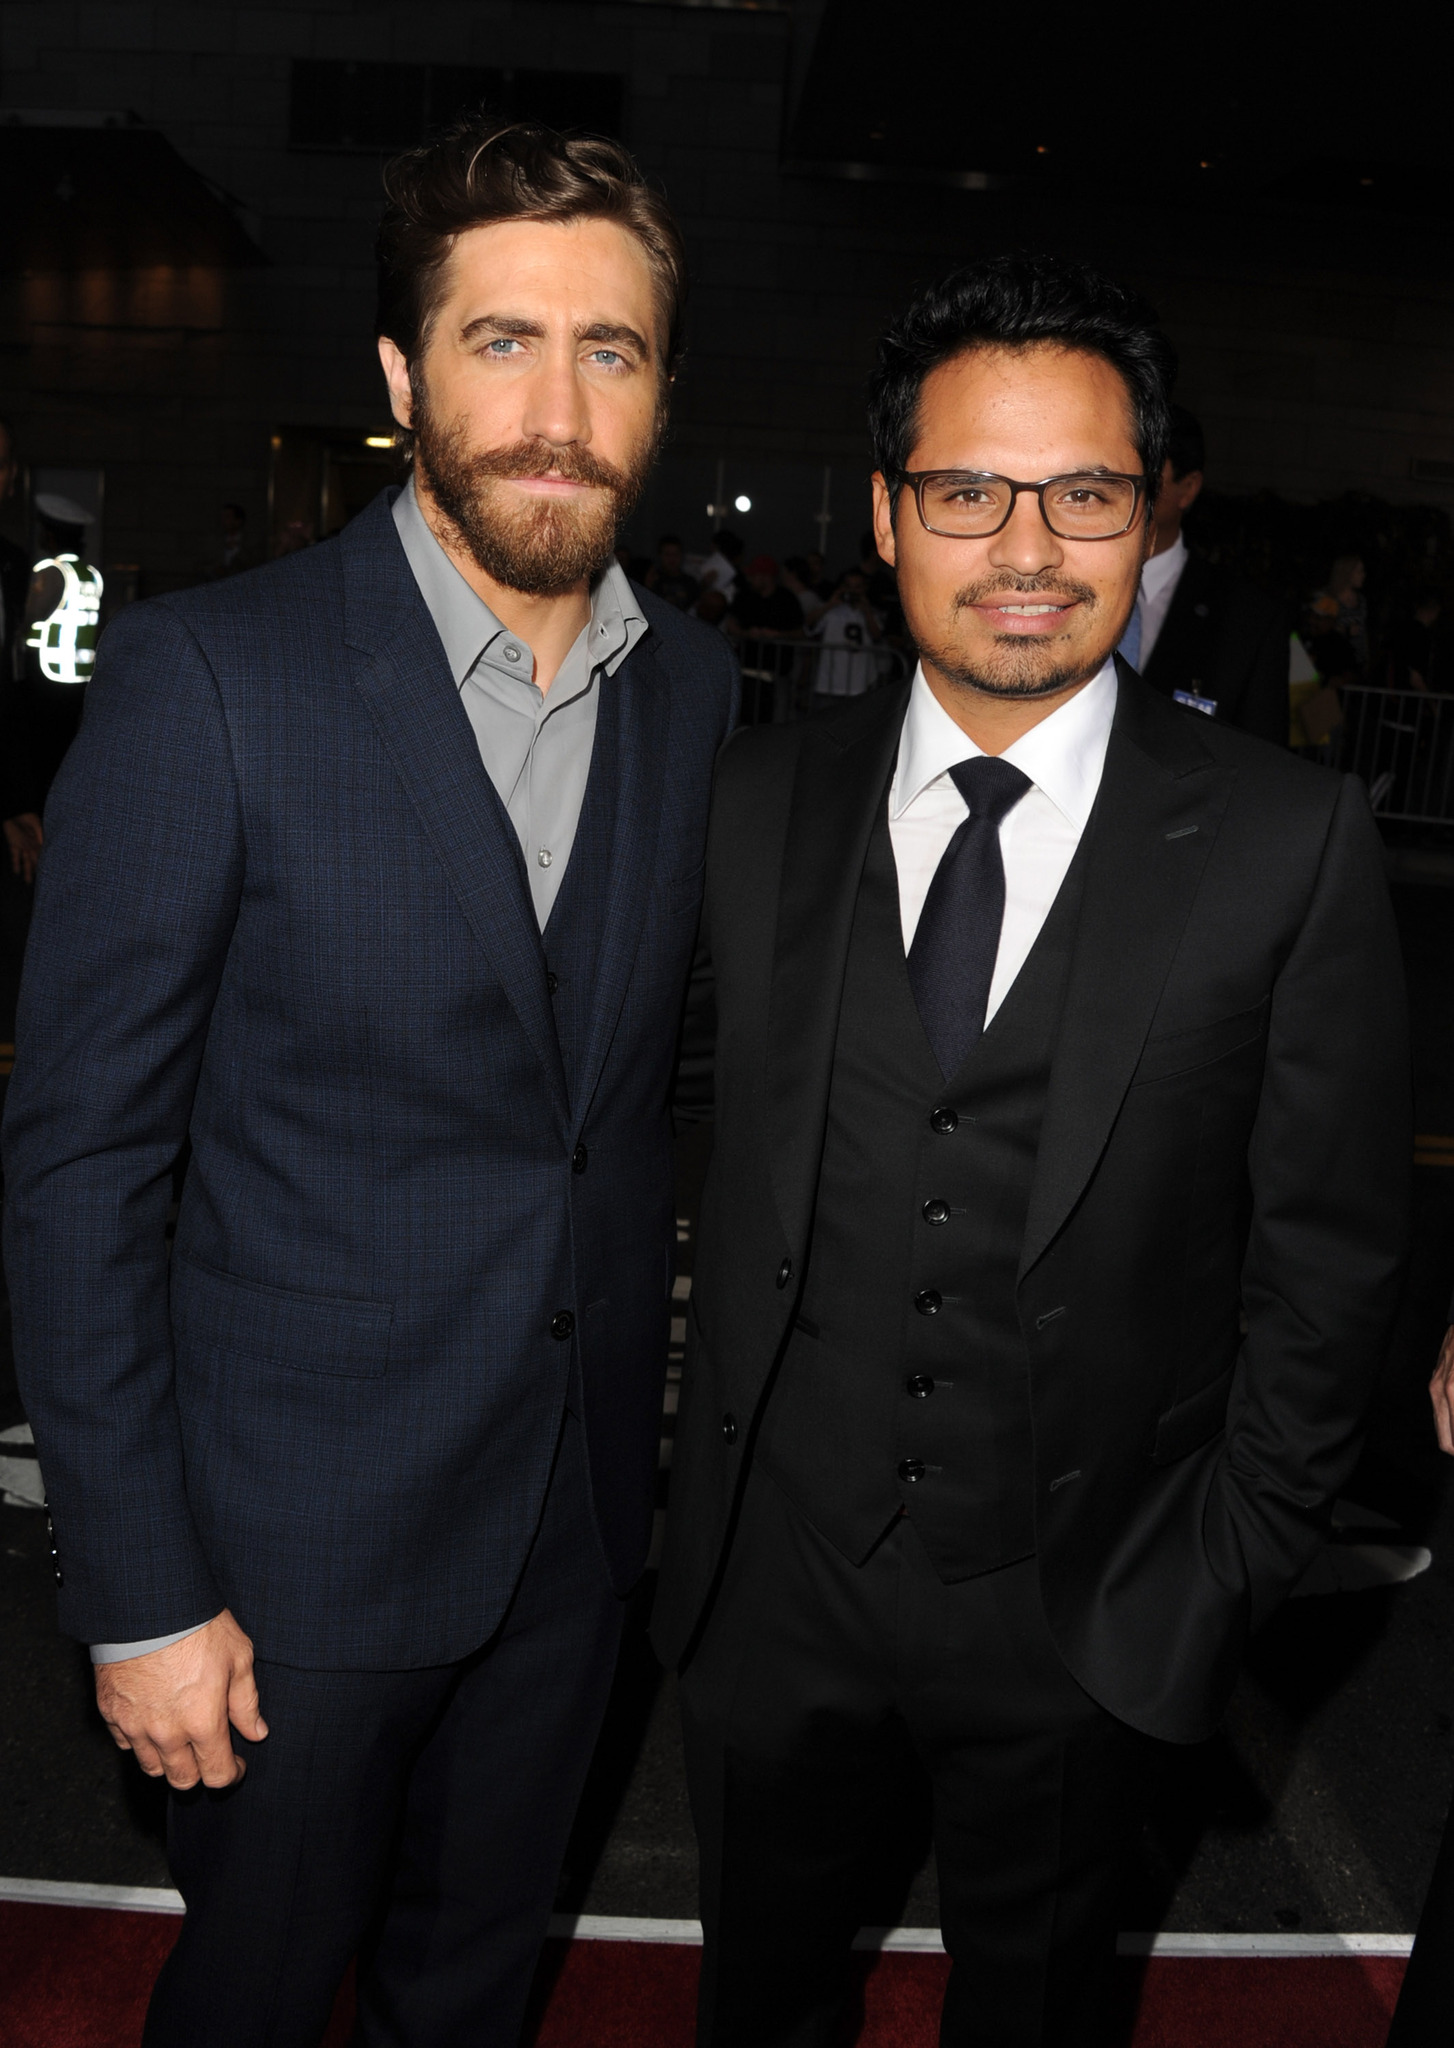 Jake Gyllenhaal and Michael Peña at event of End of Watch (2012)